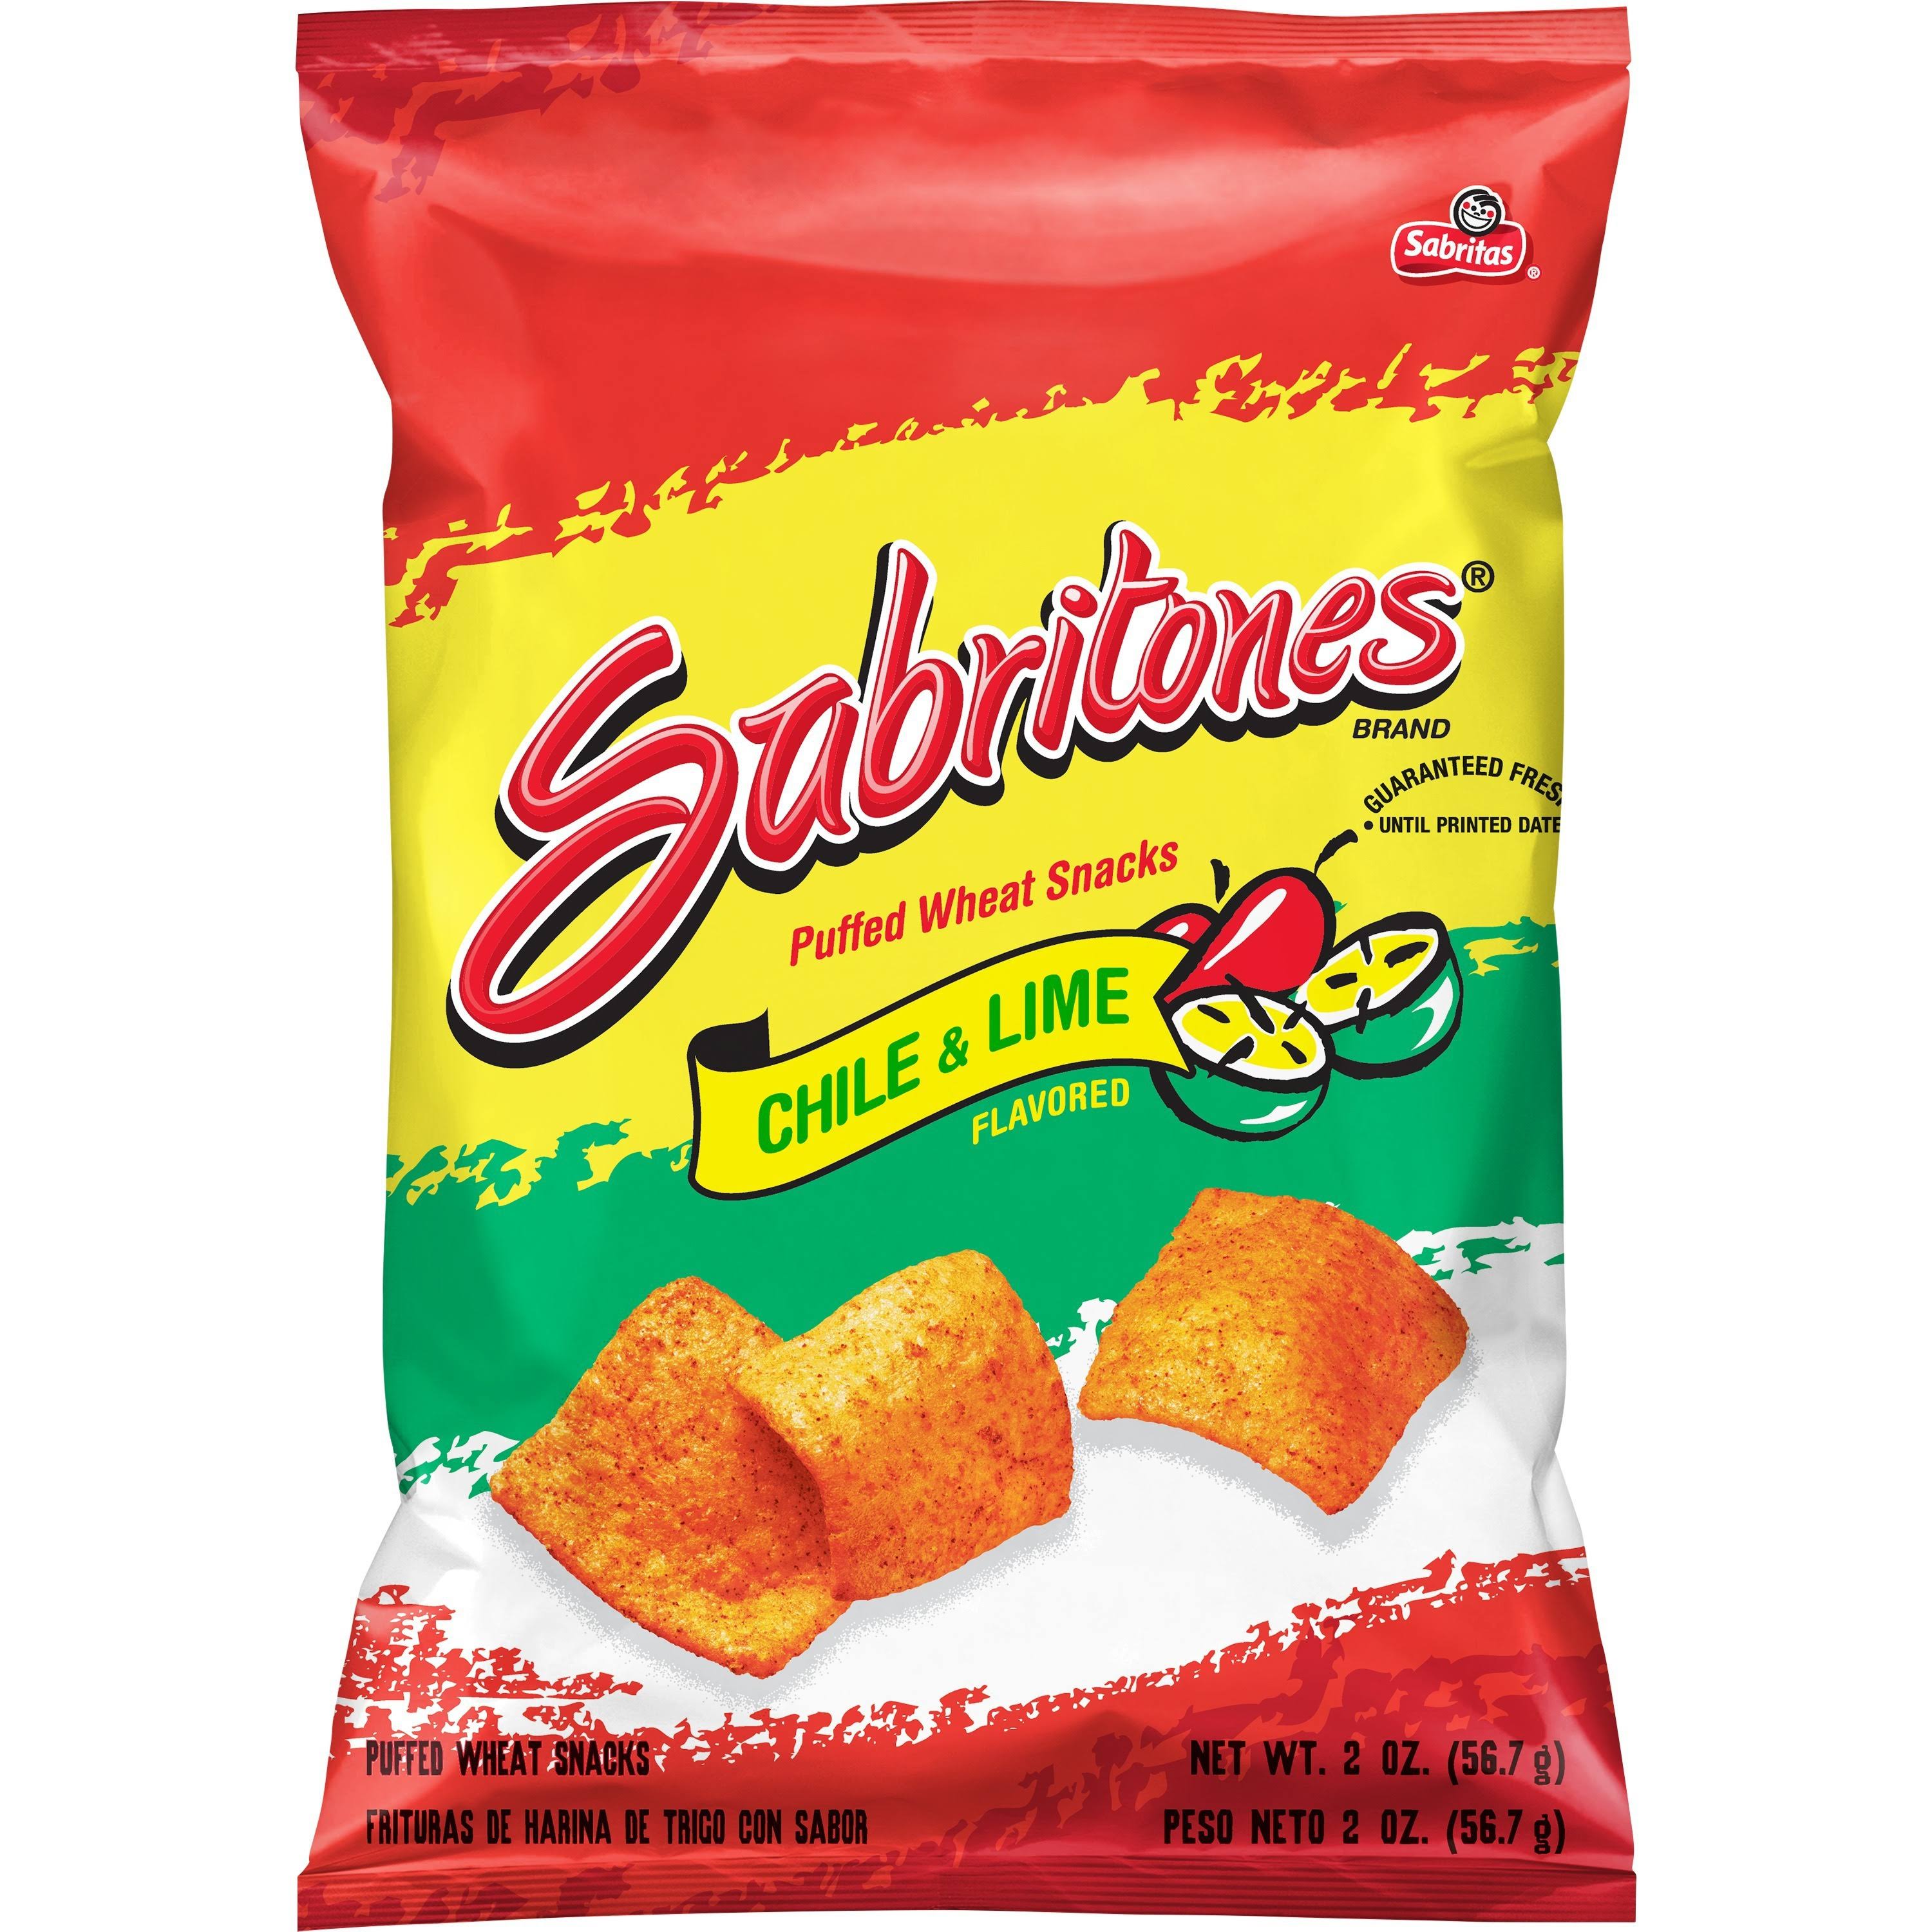 Sabritones Puffed Wheat Snacks, Chile & Lime Flavored - 2 oz